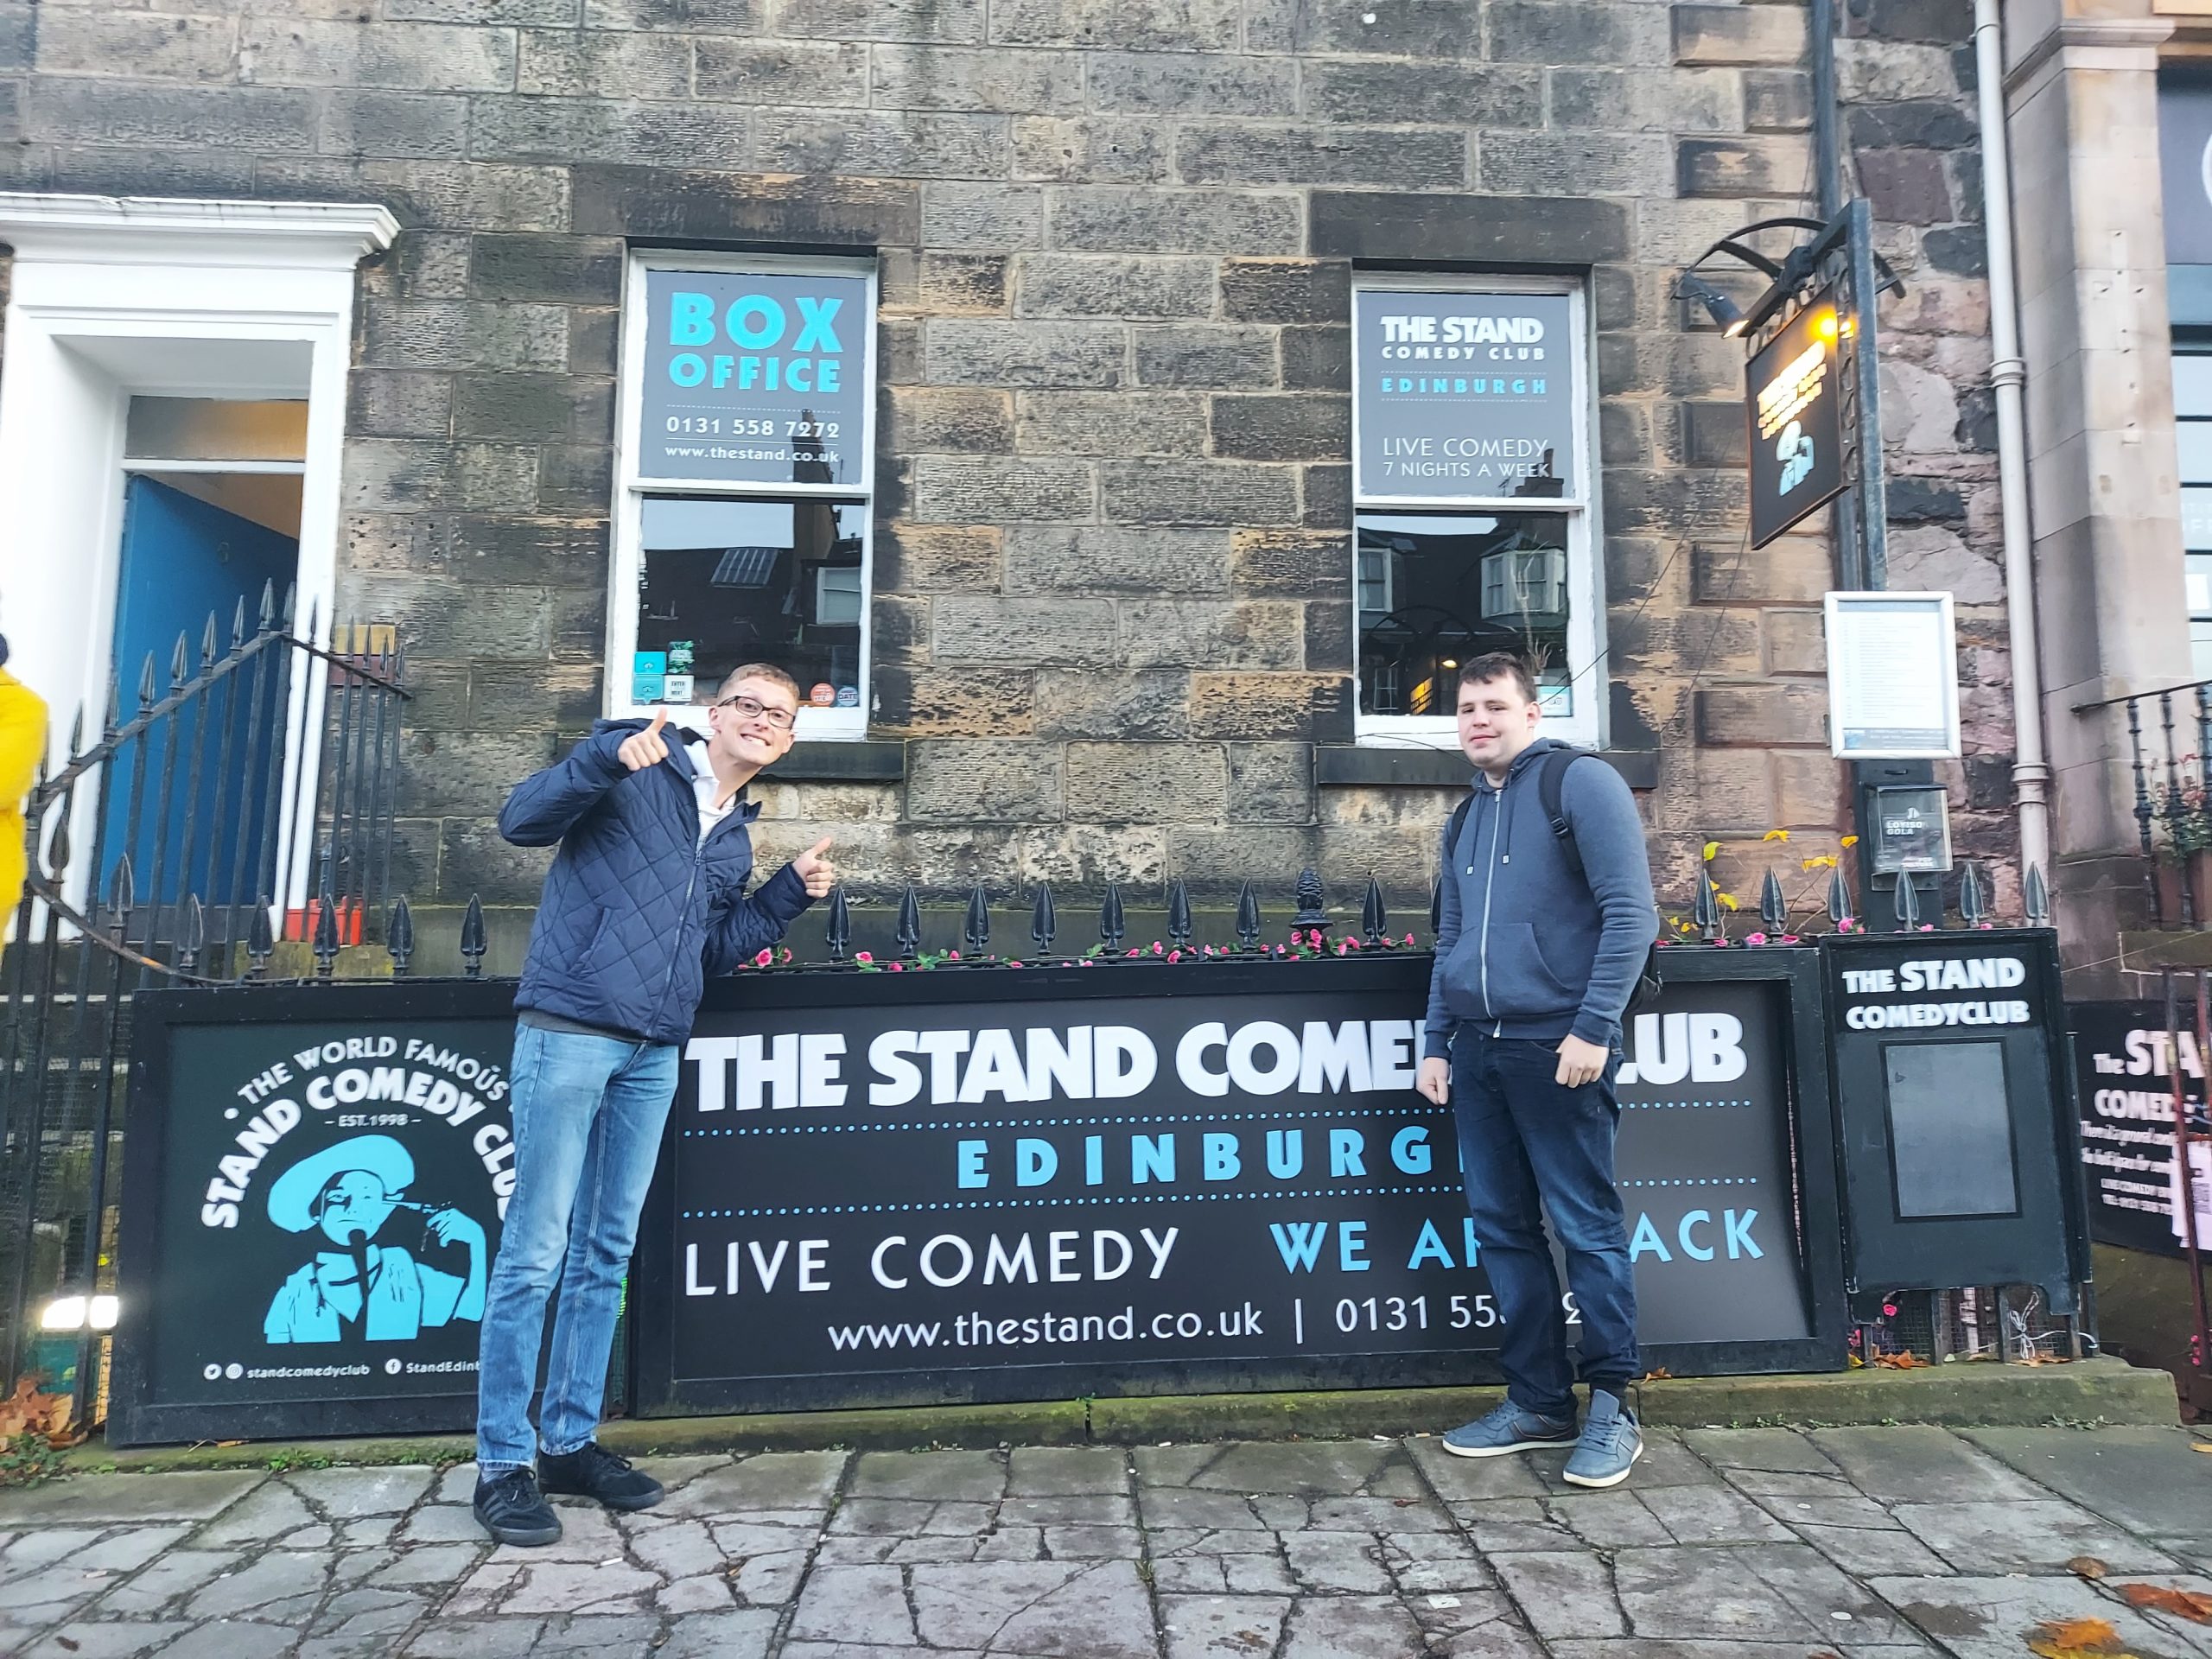 Cammy and Richard outside the Stand Comedy Club